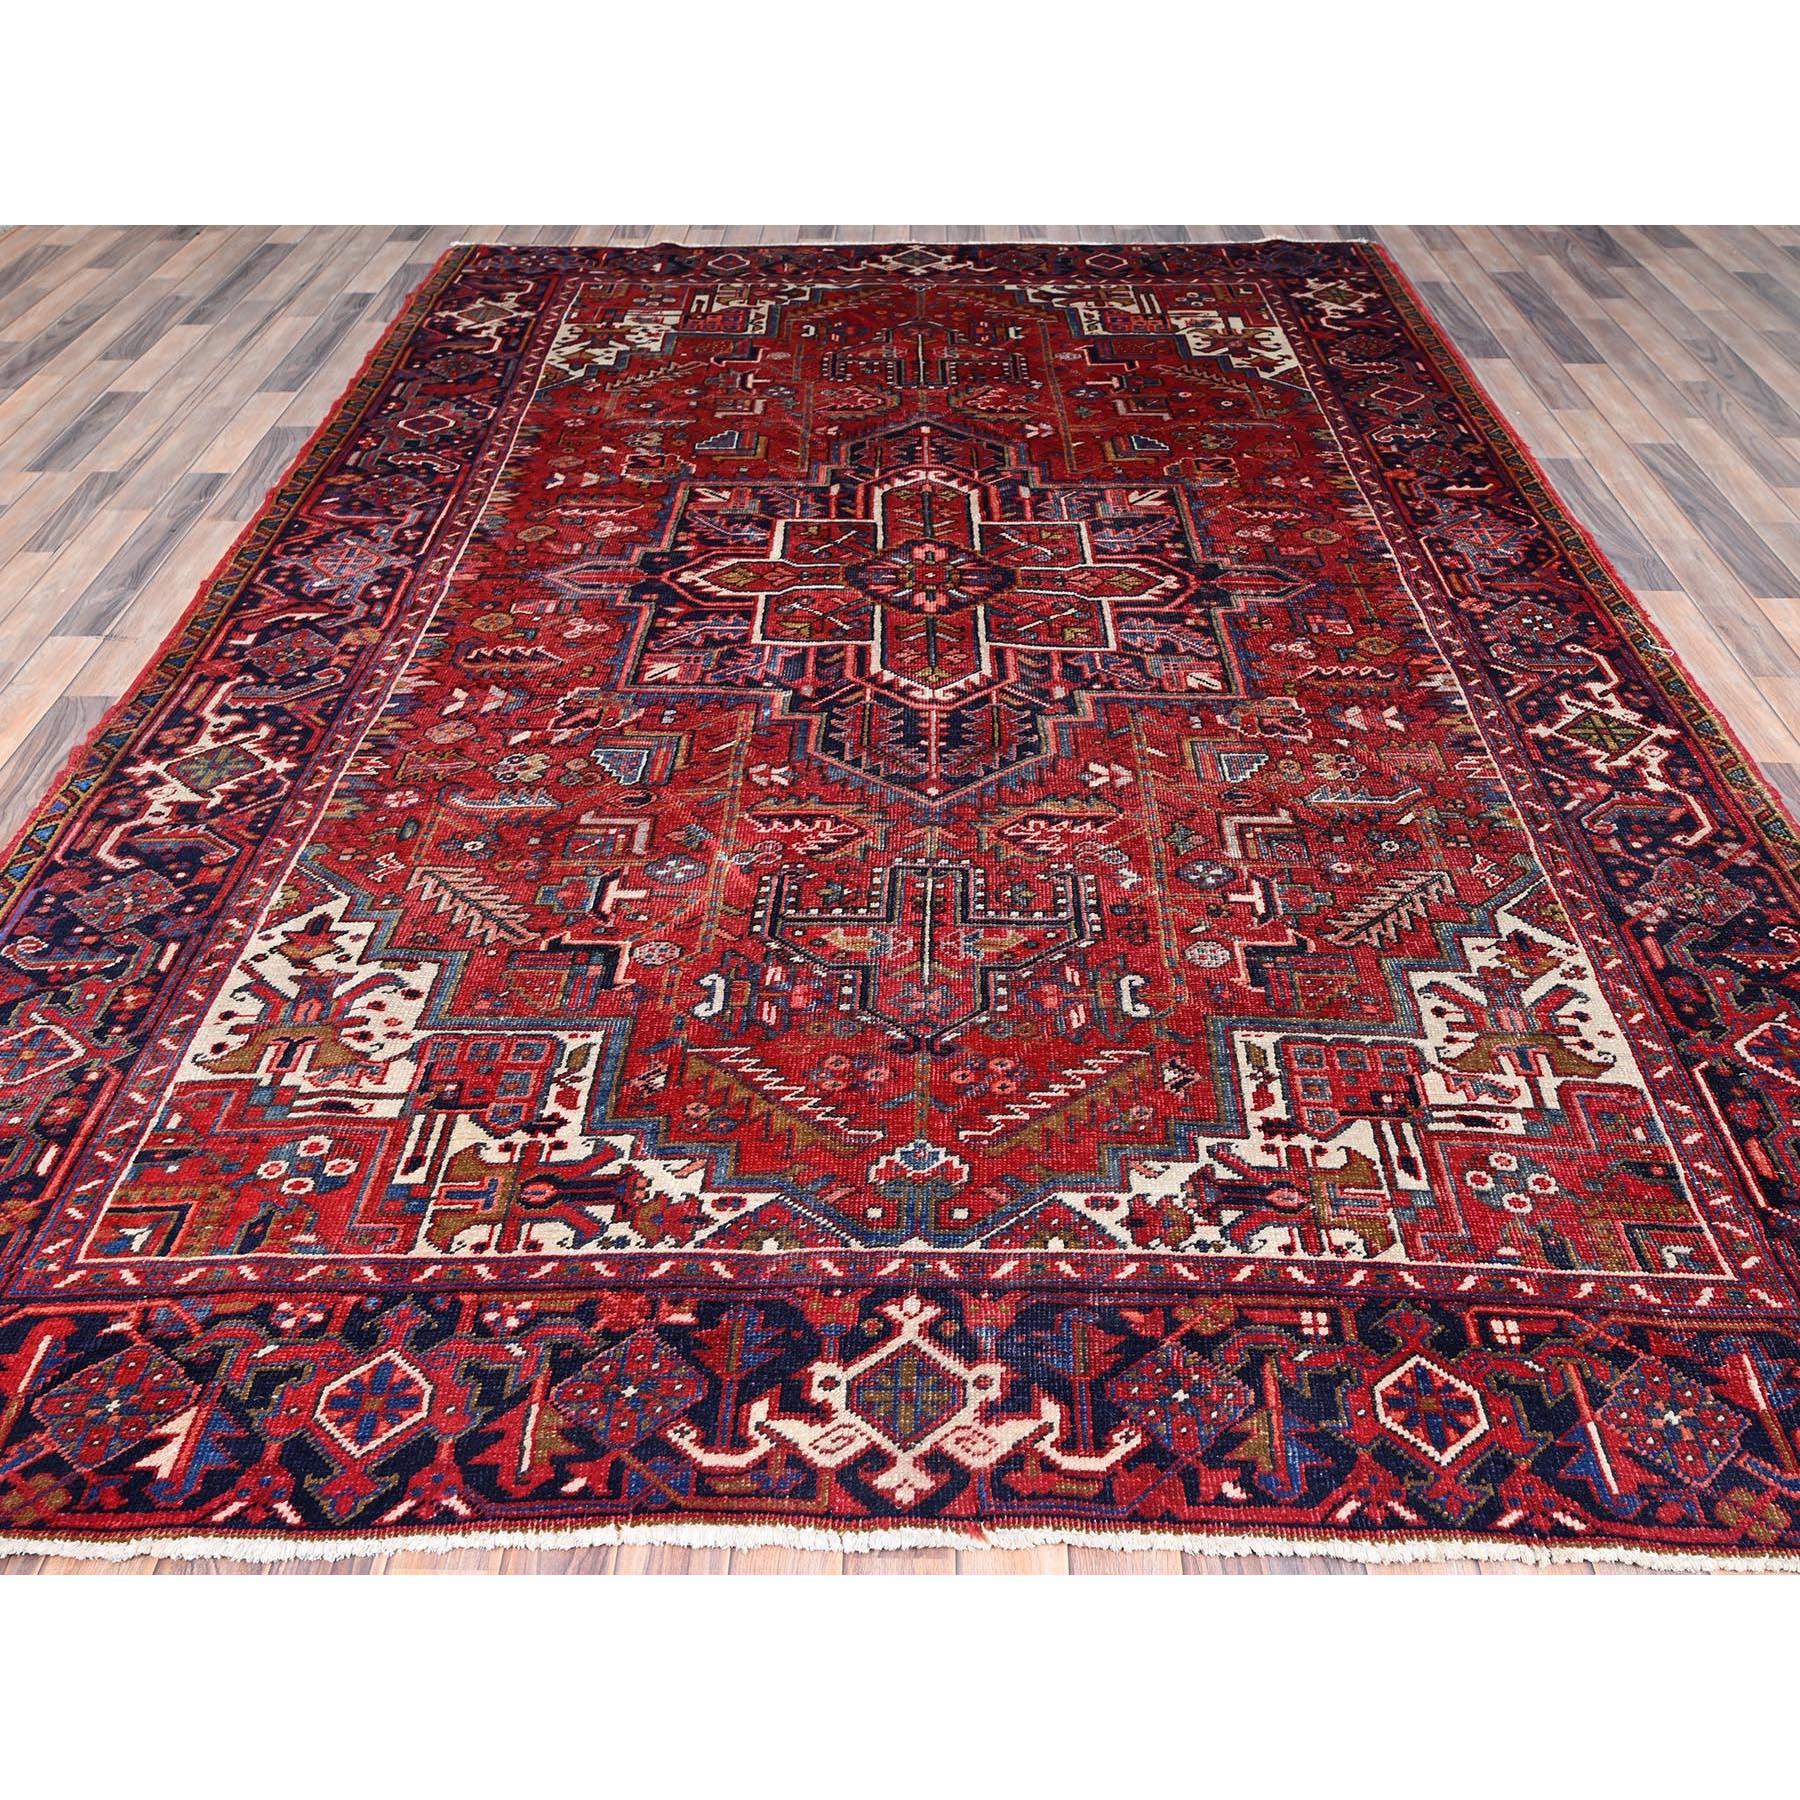 Medieval Red Evenly Worn Distressed Feel Pure Wool Vintage Persian Heriz Hand Knotted Rug For Sale